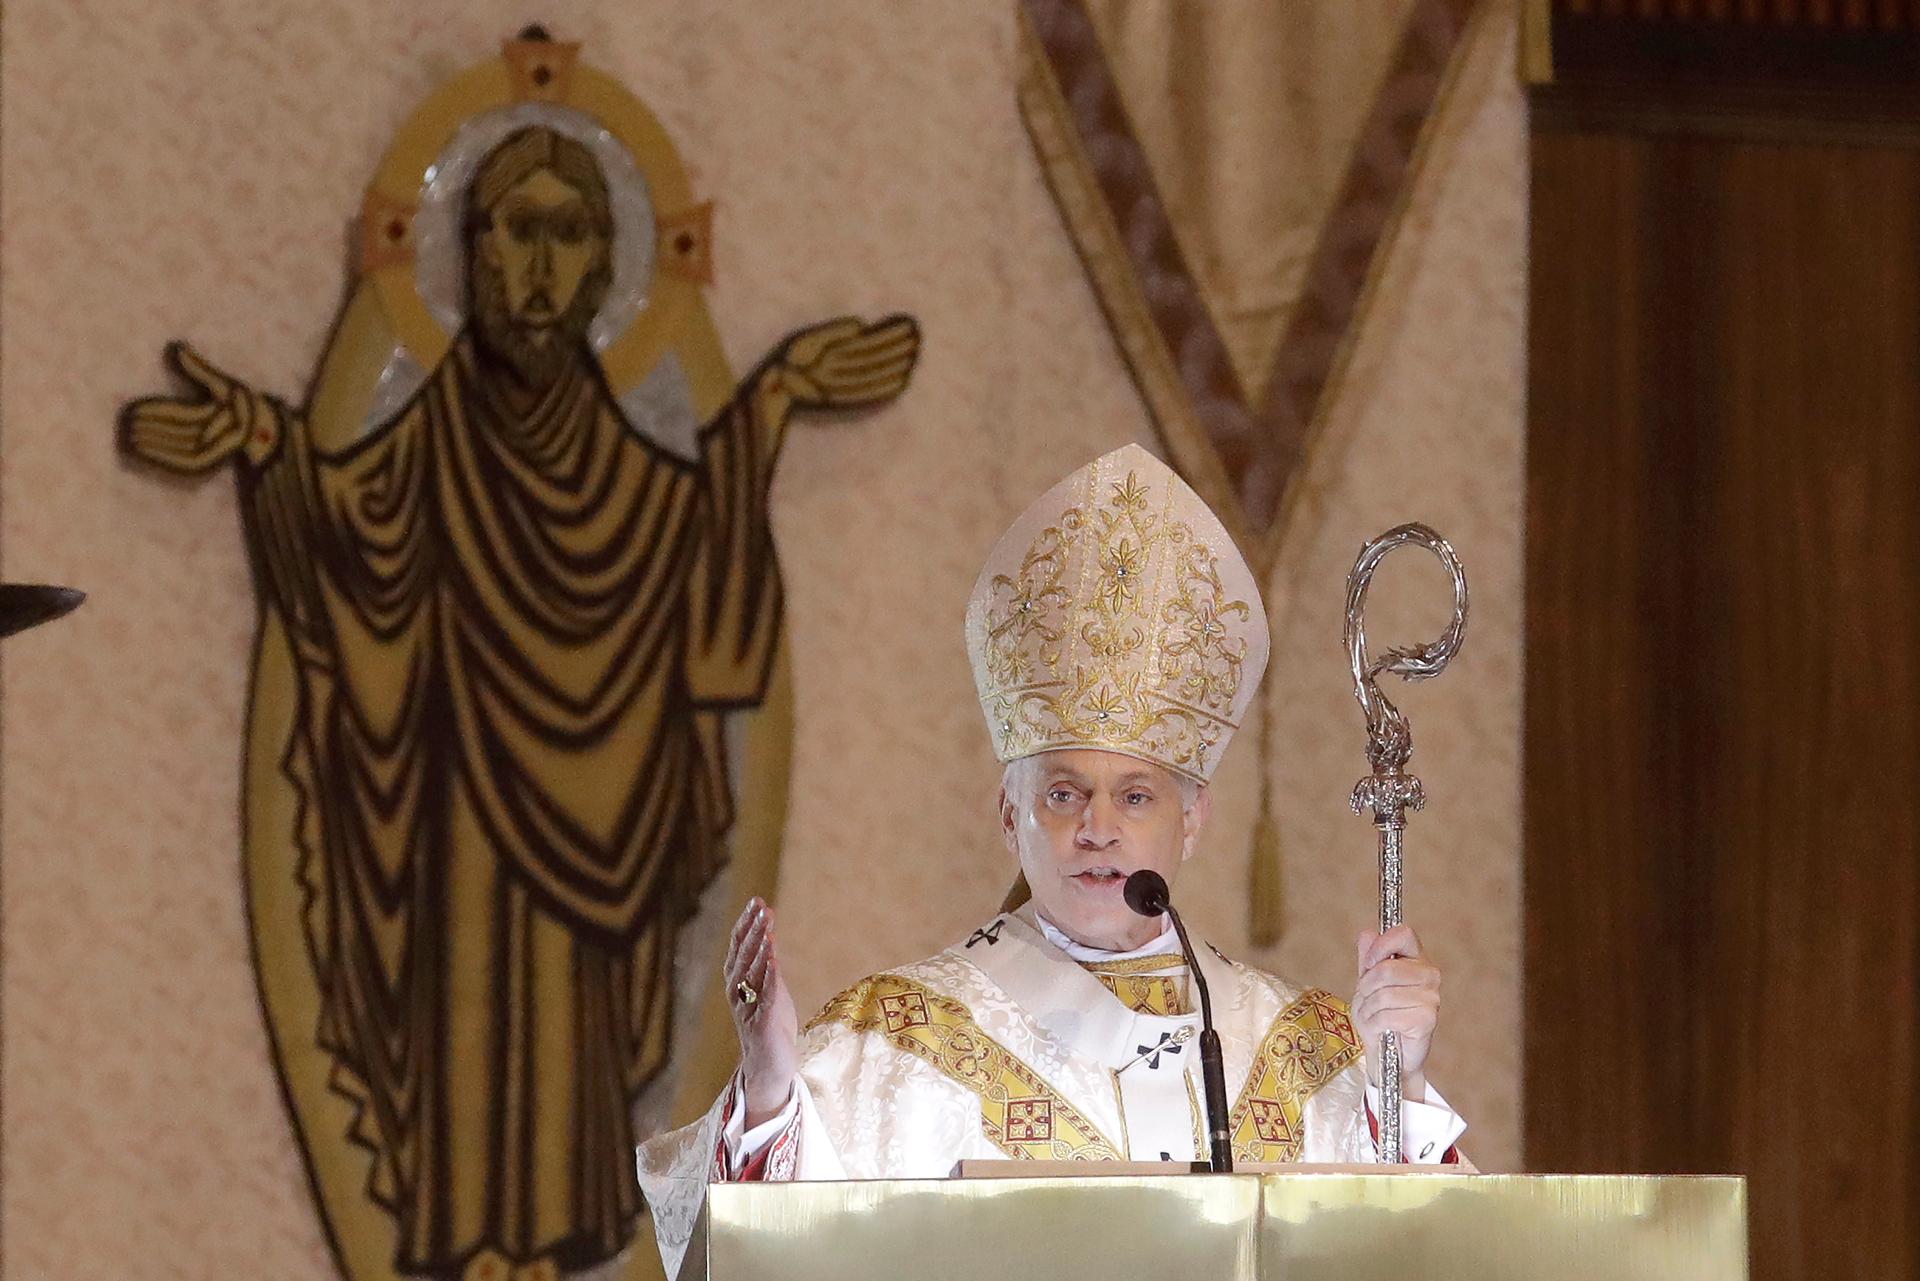 San Francisco Archbishop Salvatore Cordileone celebrates Easter Mass, which was live-streamed, at St. Mary's Cathedral in San Francisco, April 12, 2020.